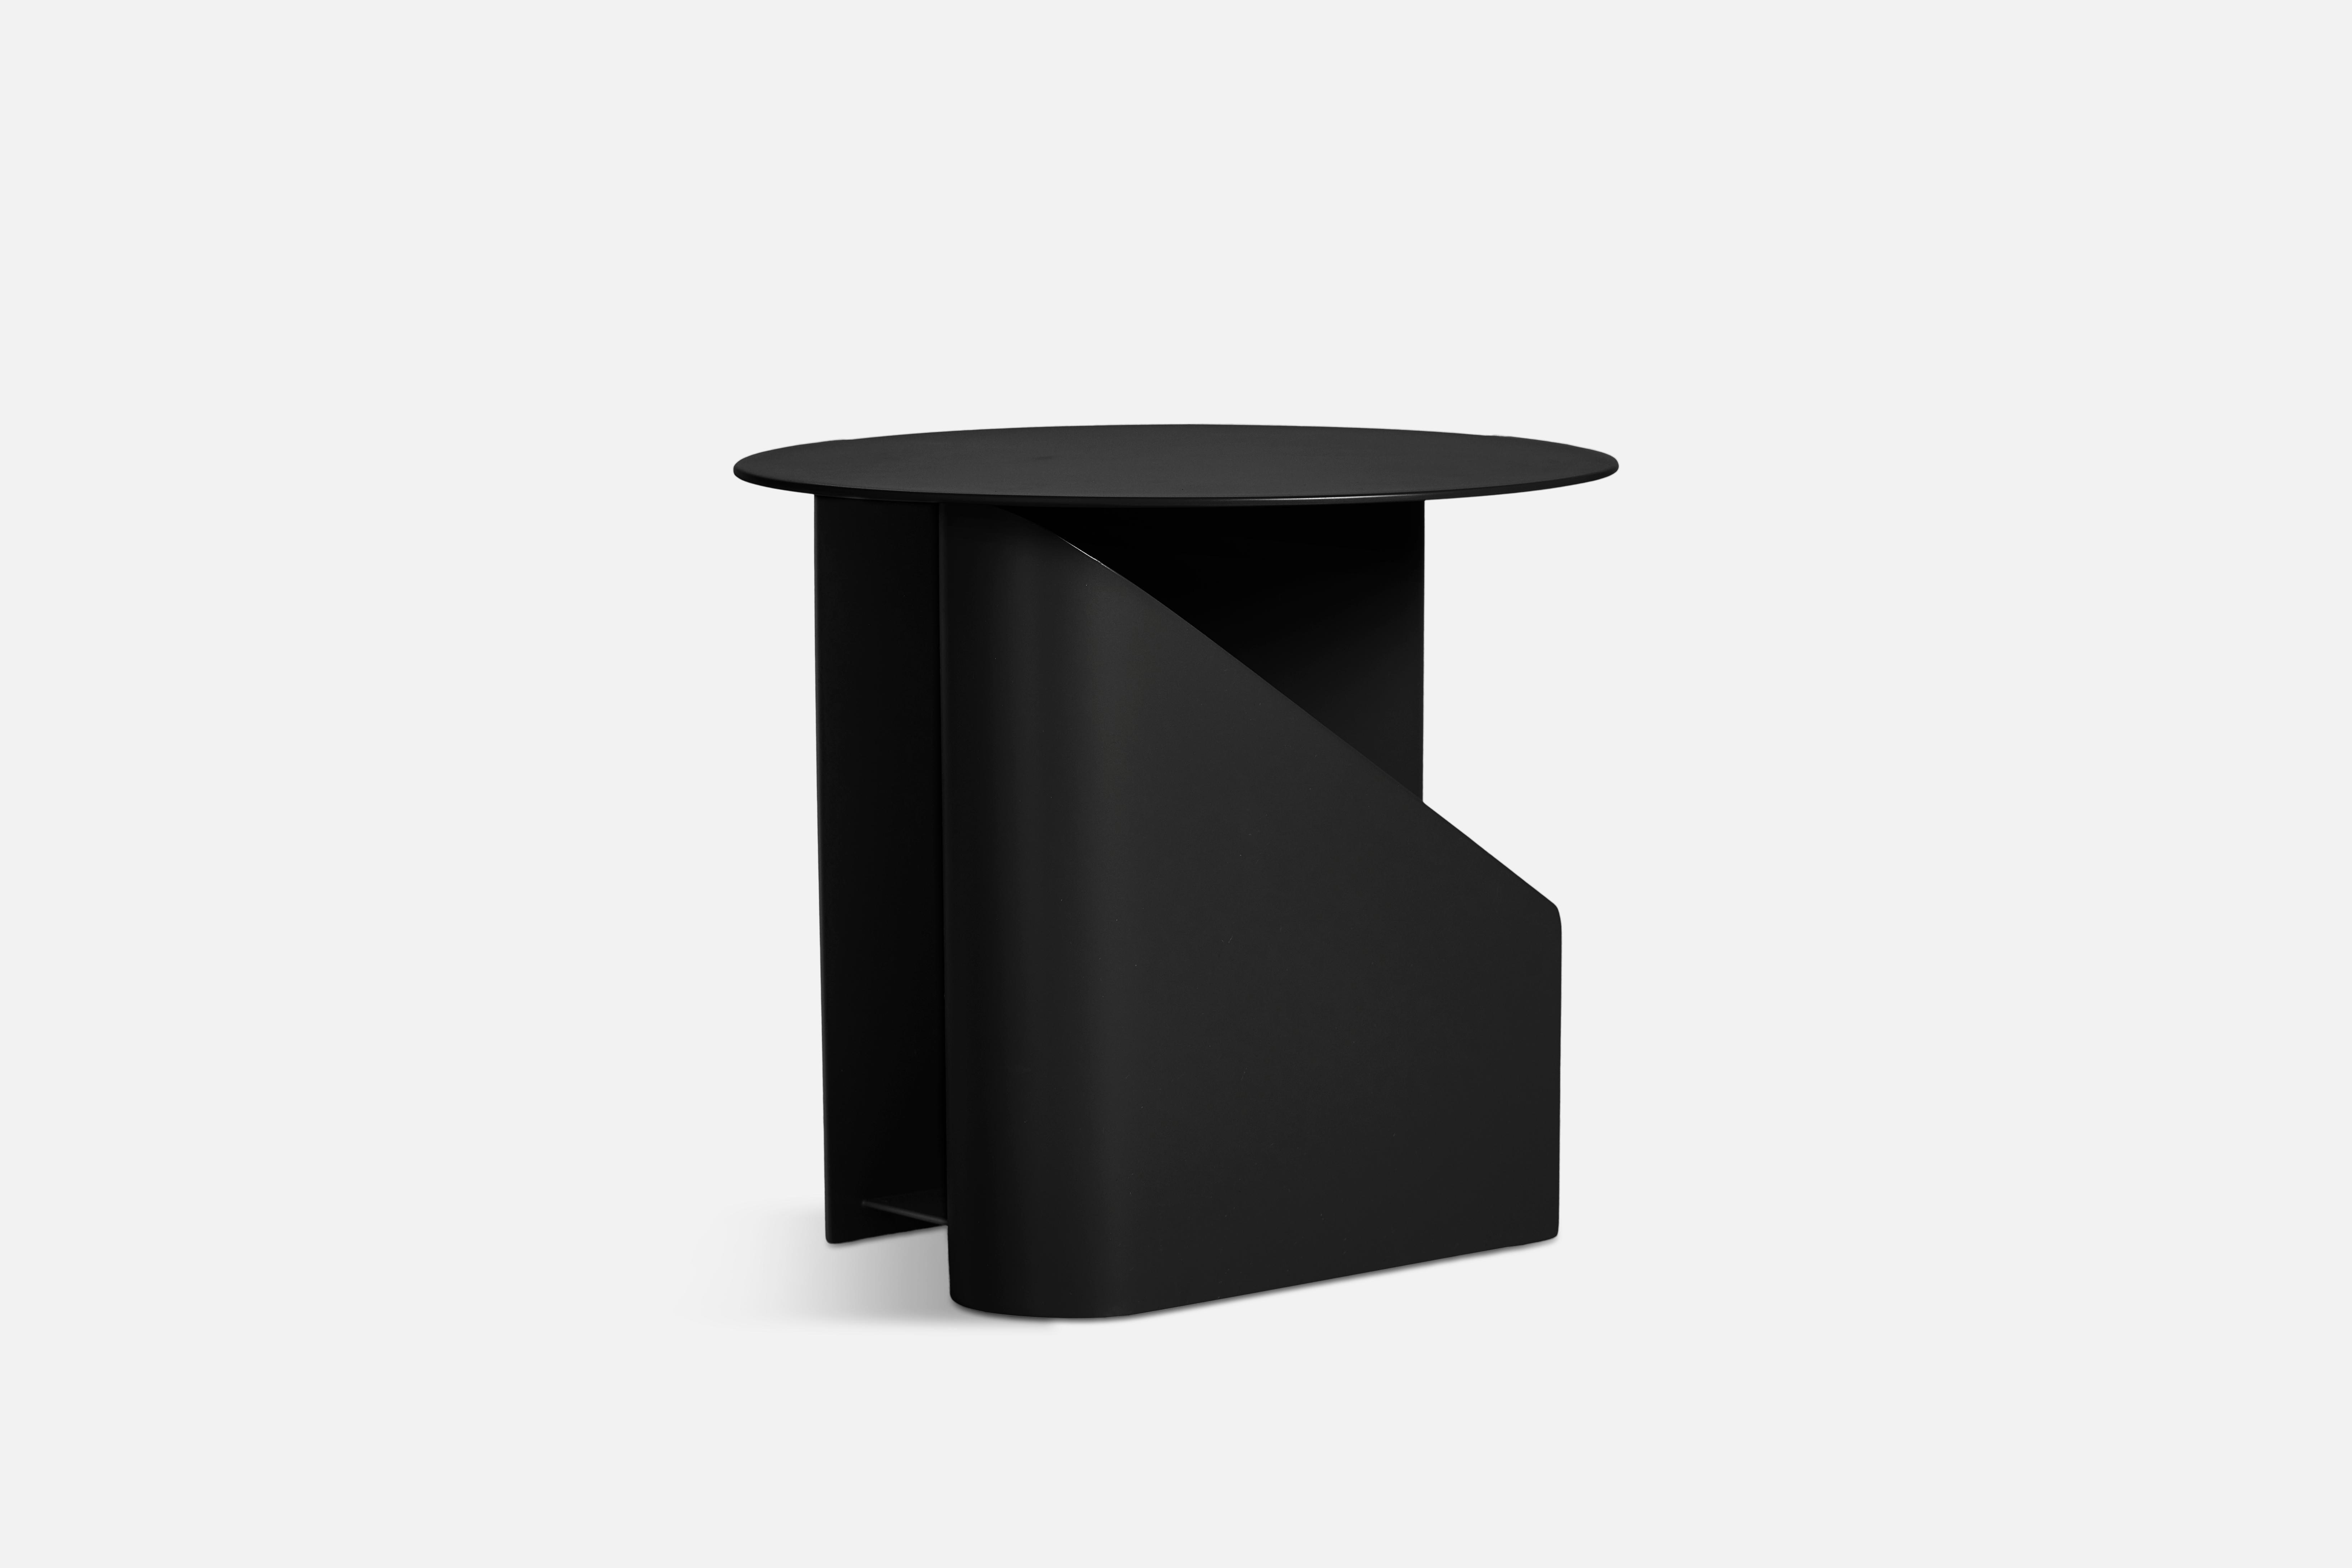 Sentrum side table by Schmahl +Schnippering.
Materials: Metal
Dimensions: D 40 x W 40 x H 36 cm
Also available in different colours.

The founders, Mia and Torben Koed, decided to put their 30 years of experience into a new project. It was time